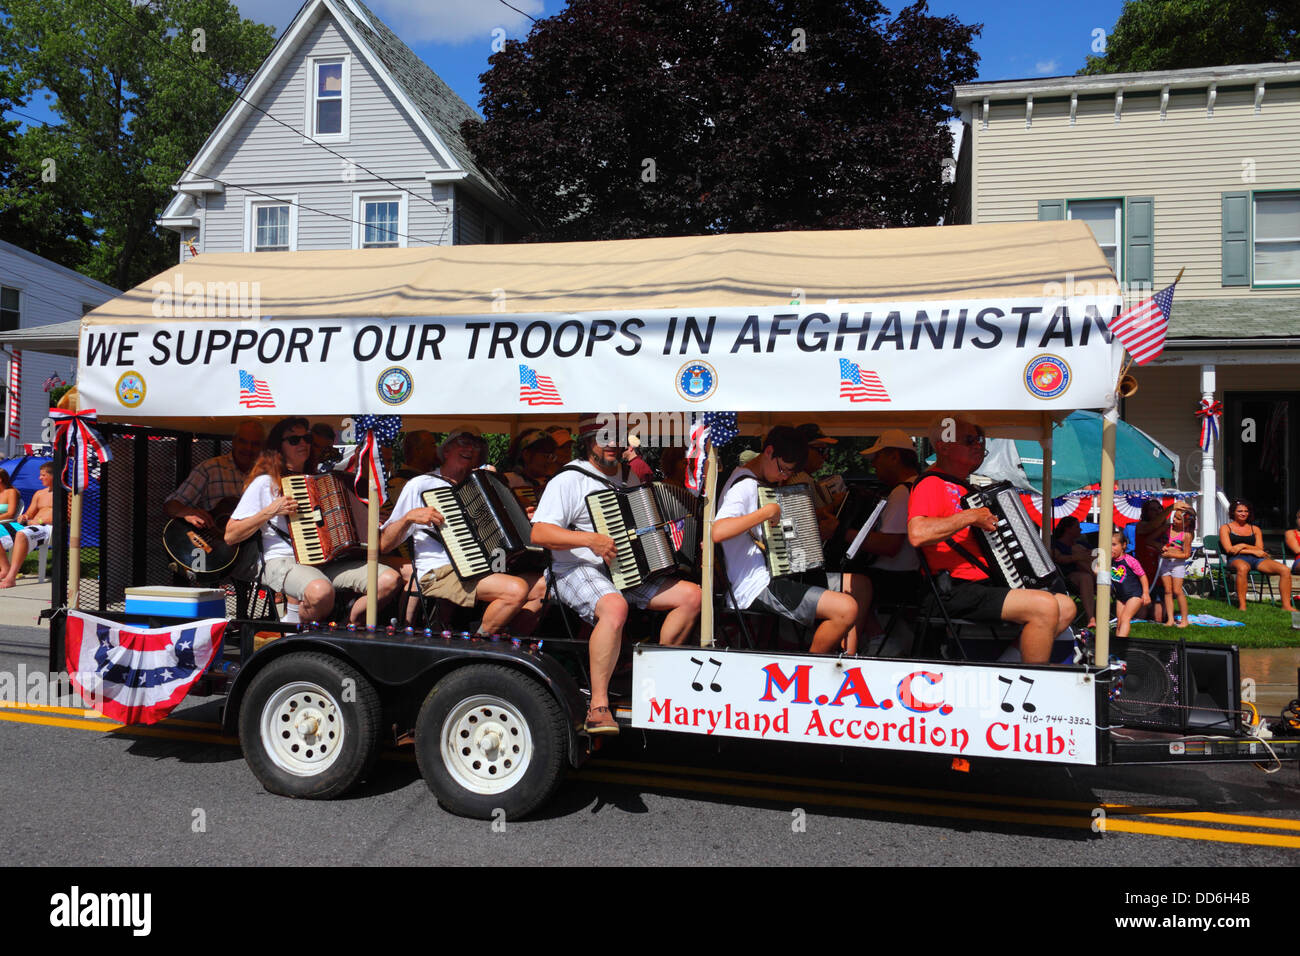 Maryland Accordion Club show support for troops in Afghanistan during 4th of July Independence Day parades, Catonsville, Maryland, USA Stock Photo